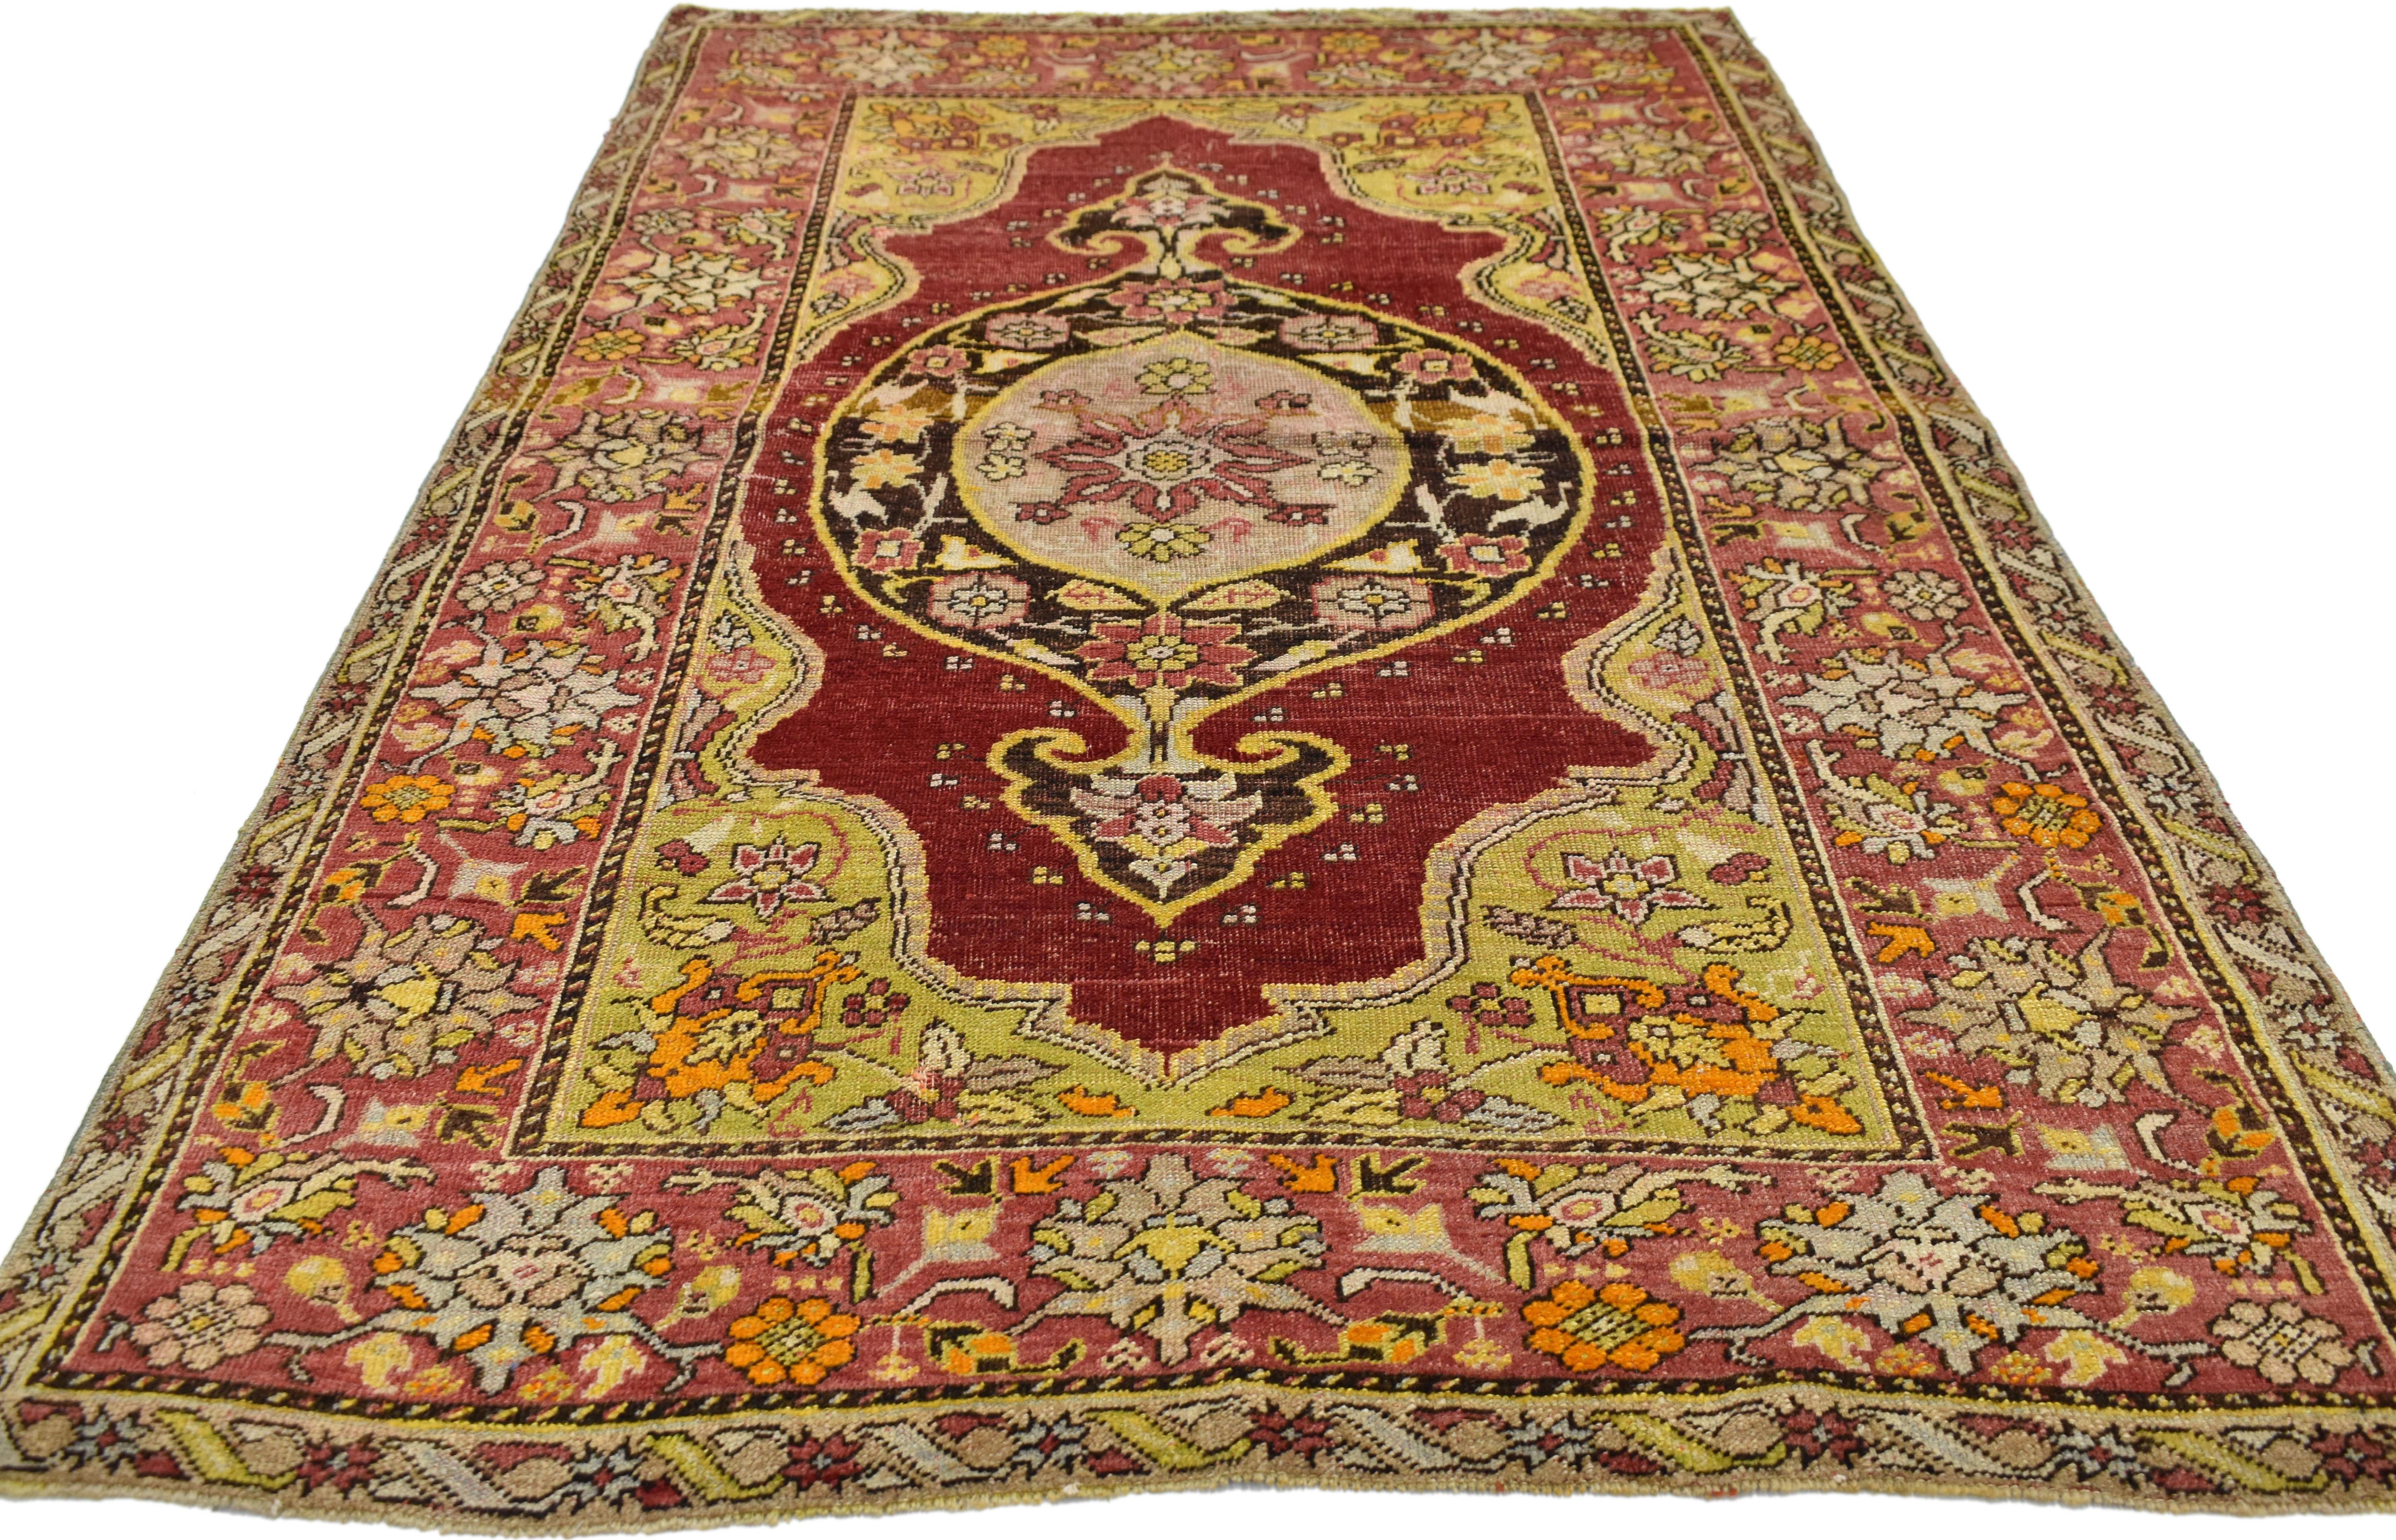 51723, vintage Turkish Oushak Accent rug, entry or foyer rug. This vintage Turkish Oushak rug features a modern traditional style. Immersed in Anatolian history and refined colors, this vintage Oushak rug combines simplicity with sophistication.